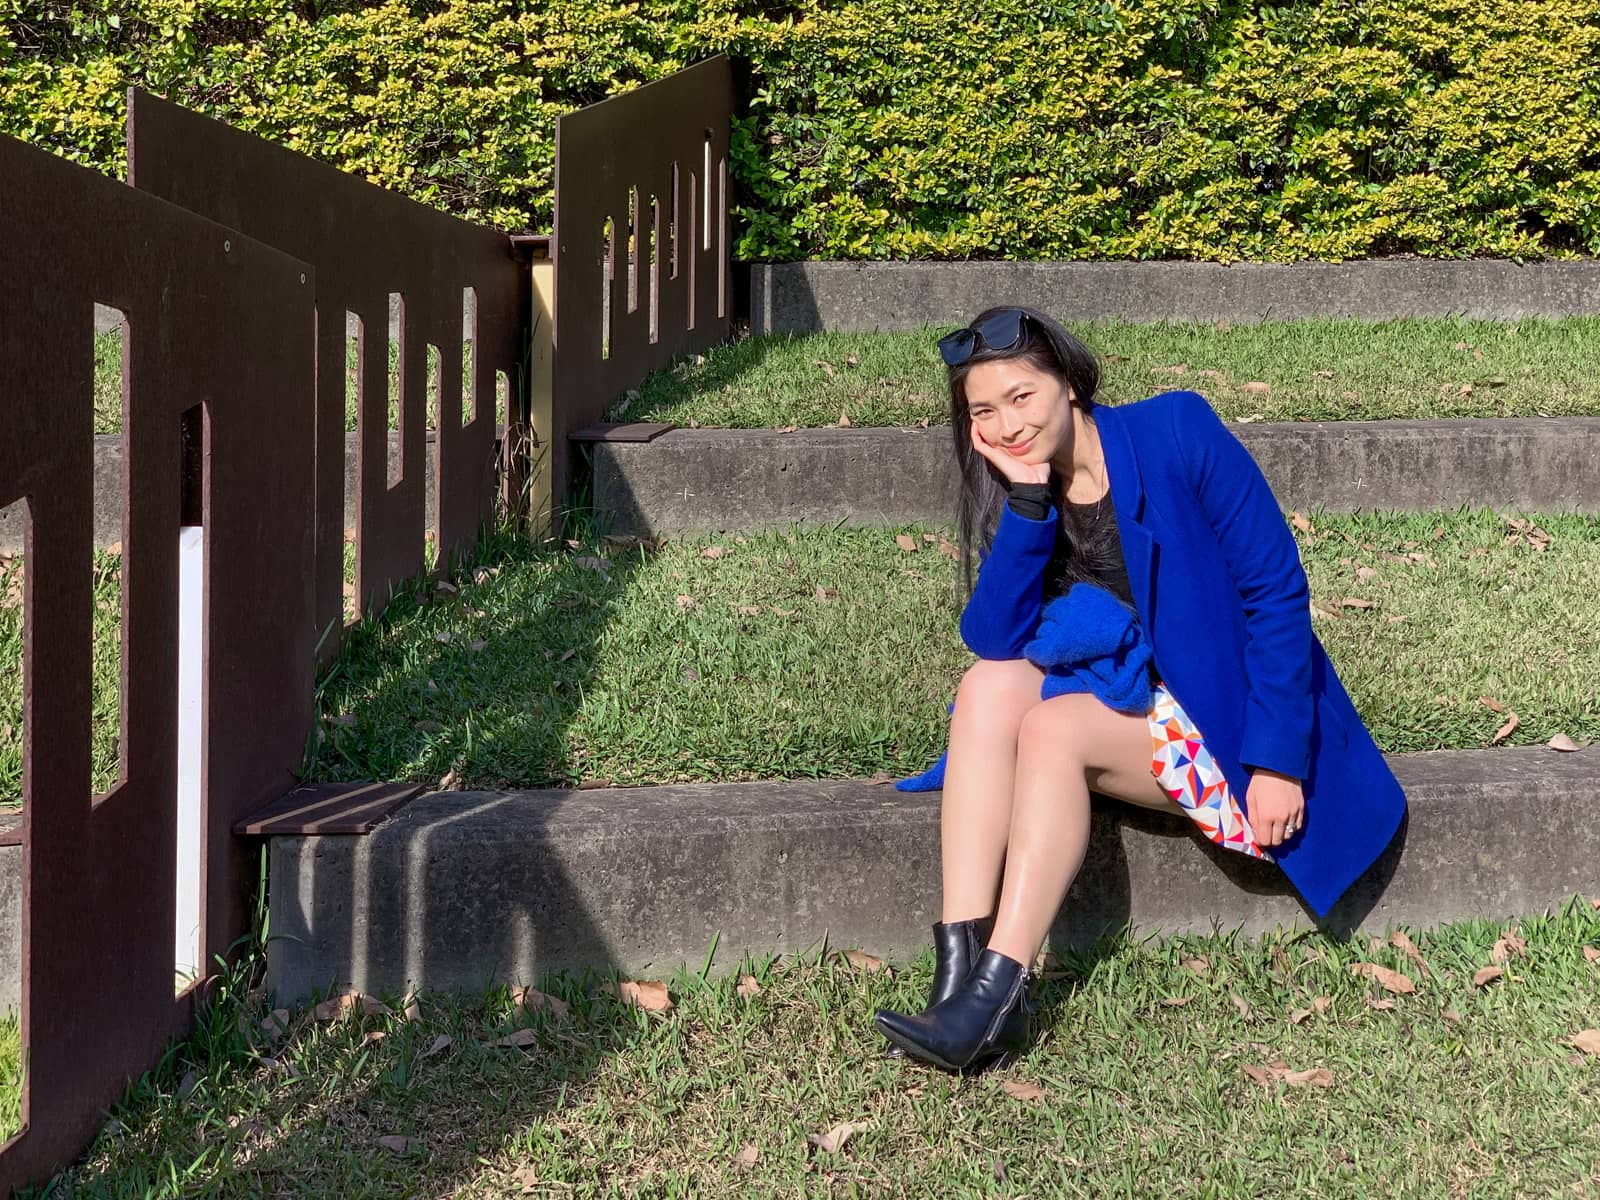 A woman with long dark hair sitting on a stone step in a grassy park. She has her knees bent and her head resting on her hand as her elbow is resting on her knee. She is wearing sunglasses on top of her head, and a bright blue coat. She is wearing a skirt and black heeled boots.